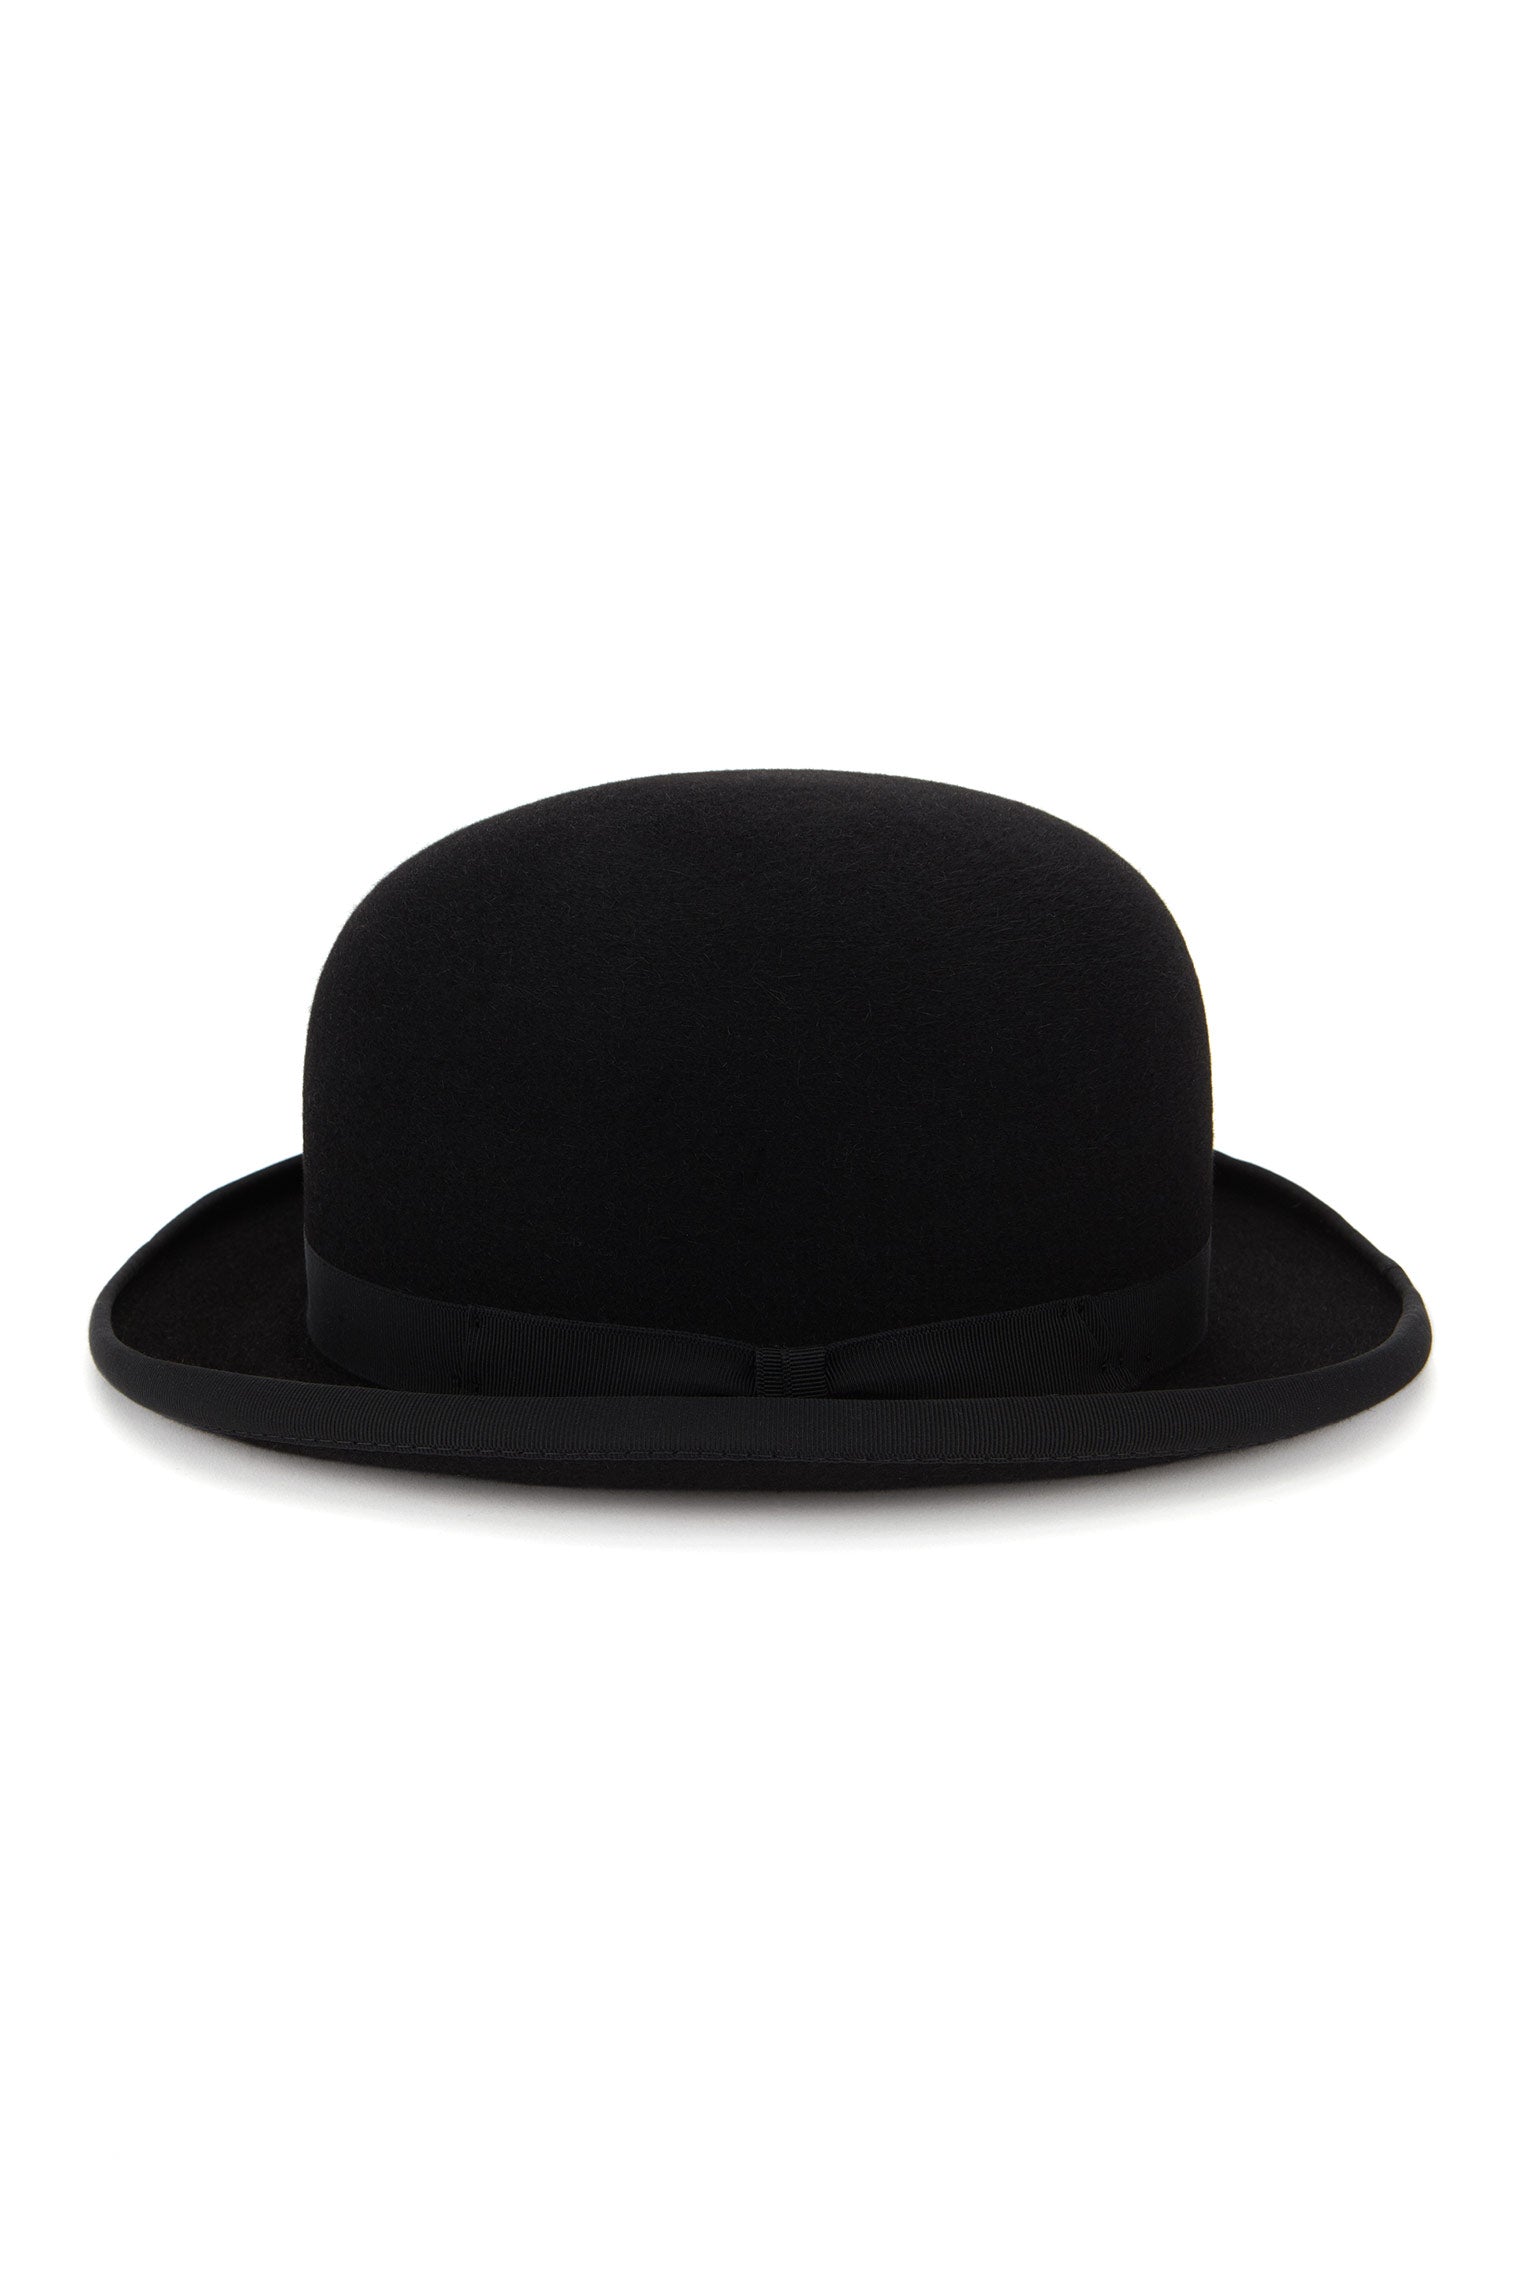 Extra-Firm Coke - Hats for Tall People - Lock & Co. Hatters London UK